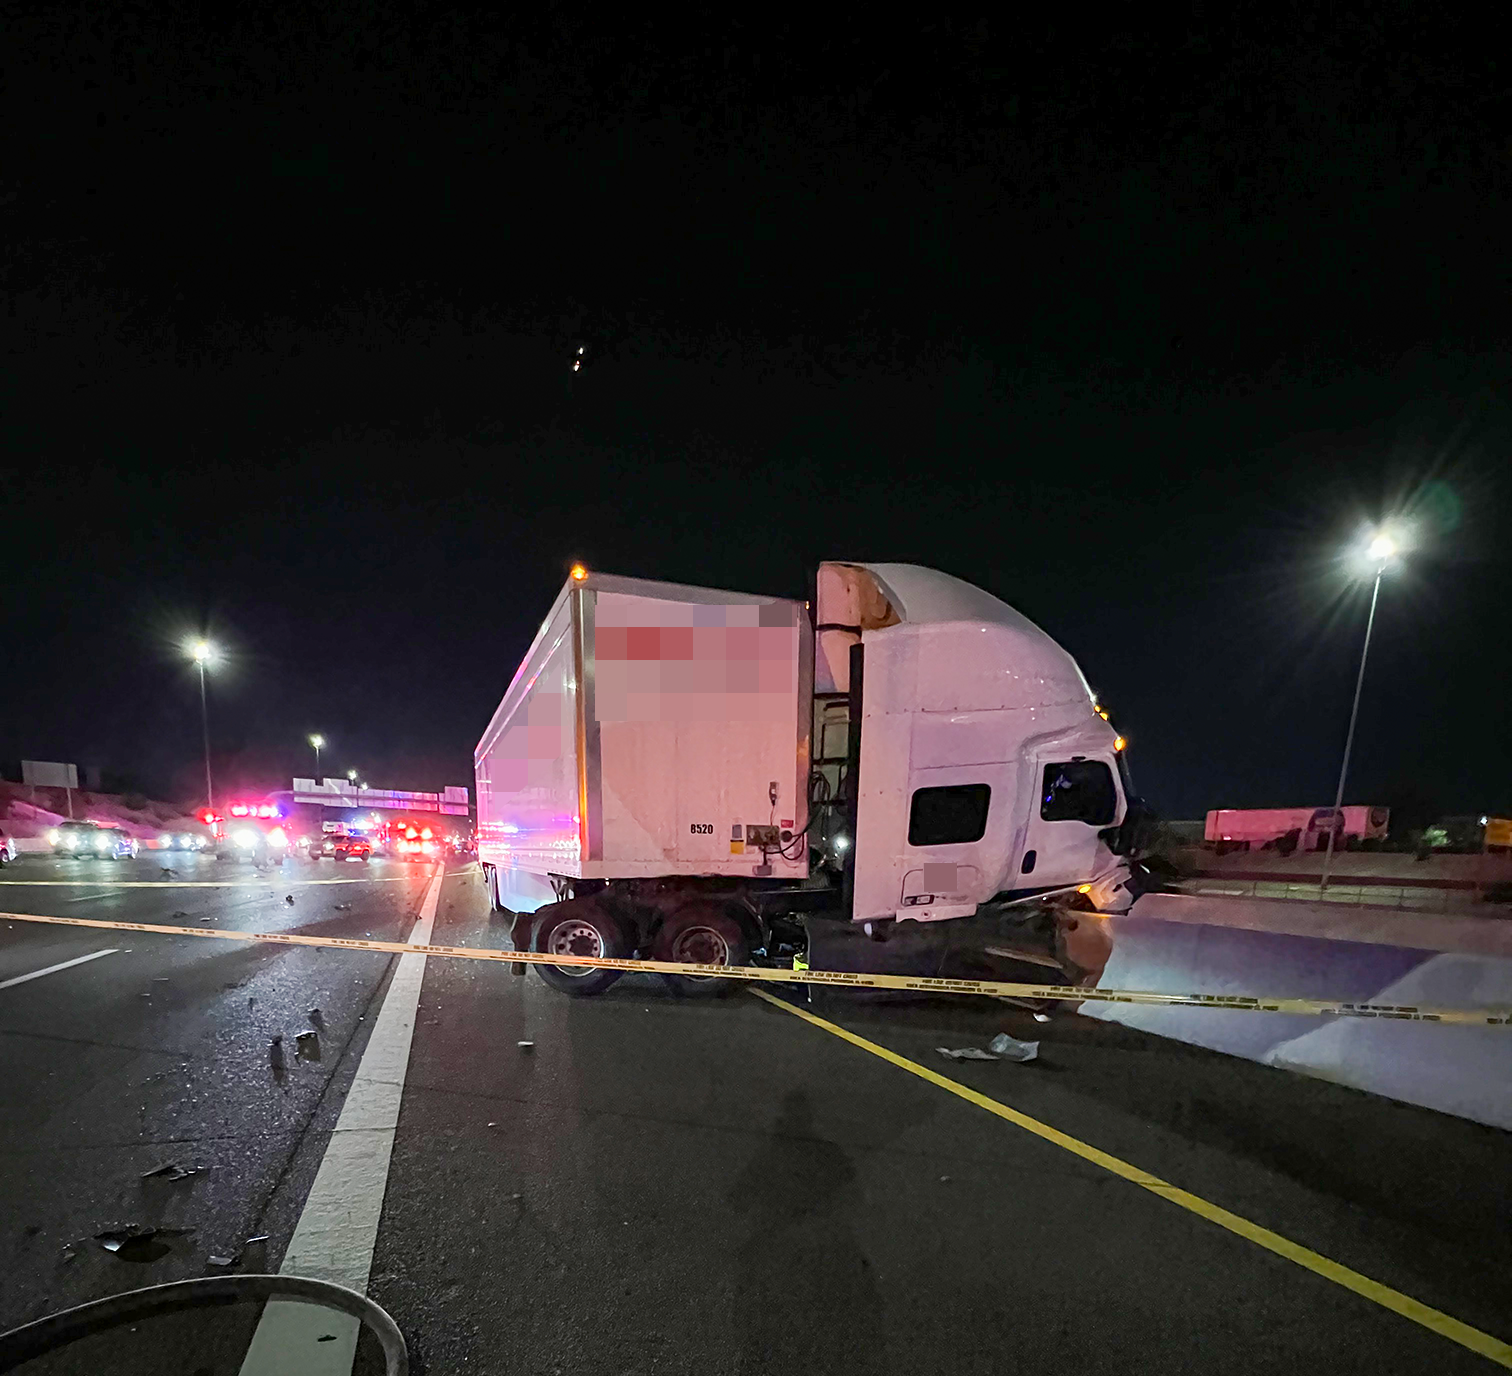 A crashed white tractor-trailer partially into the highway median barrier wall with the cab turned sideways